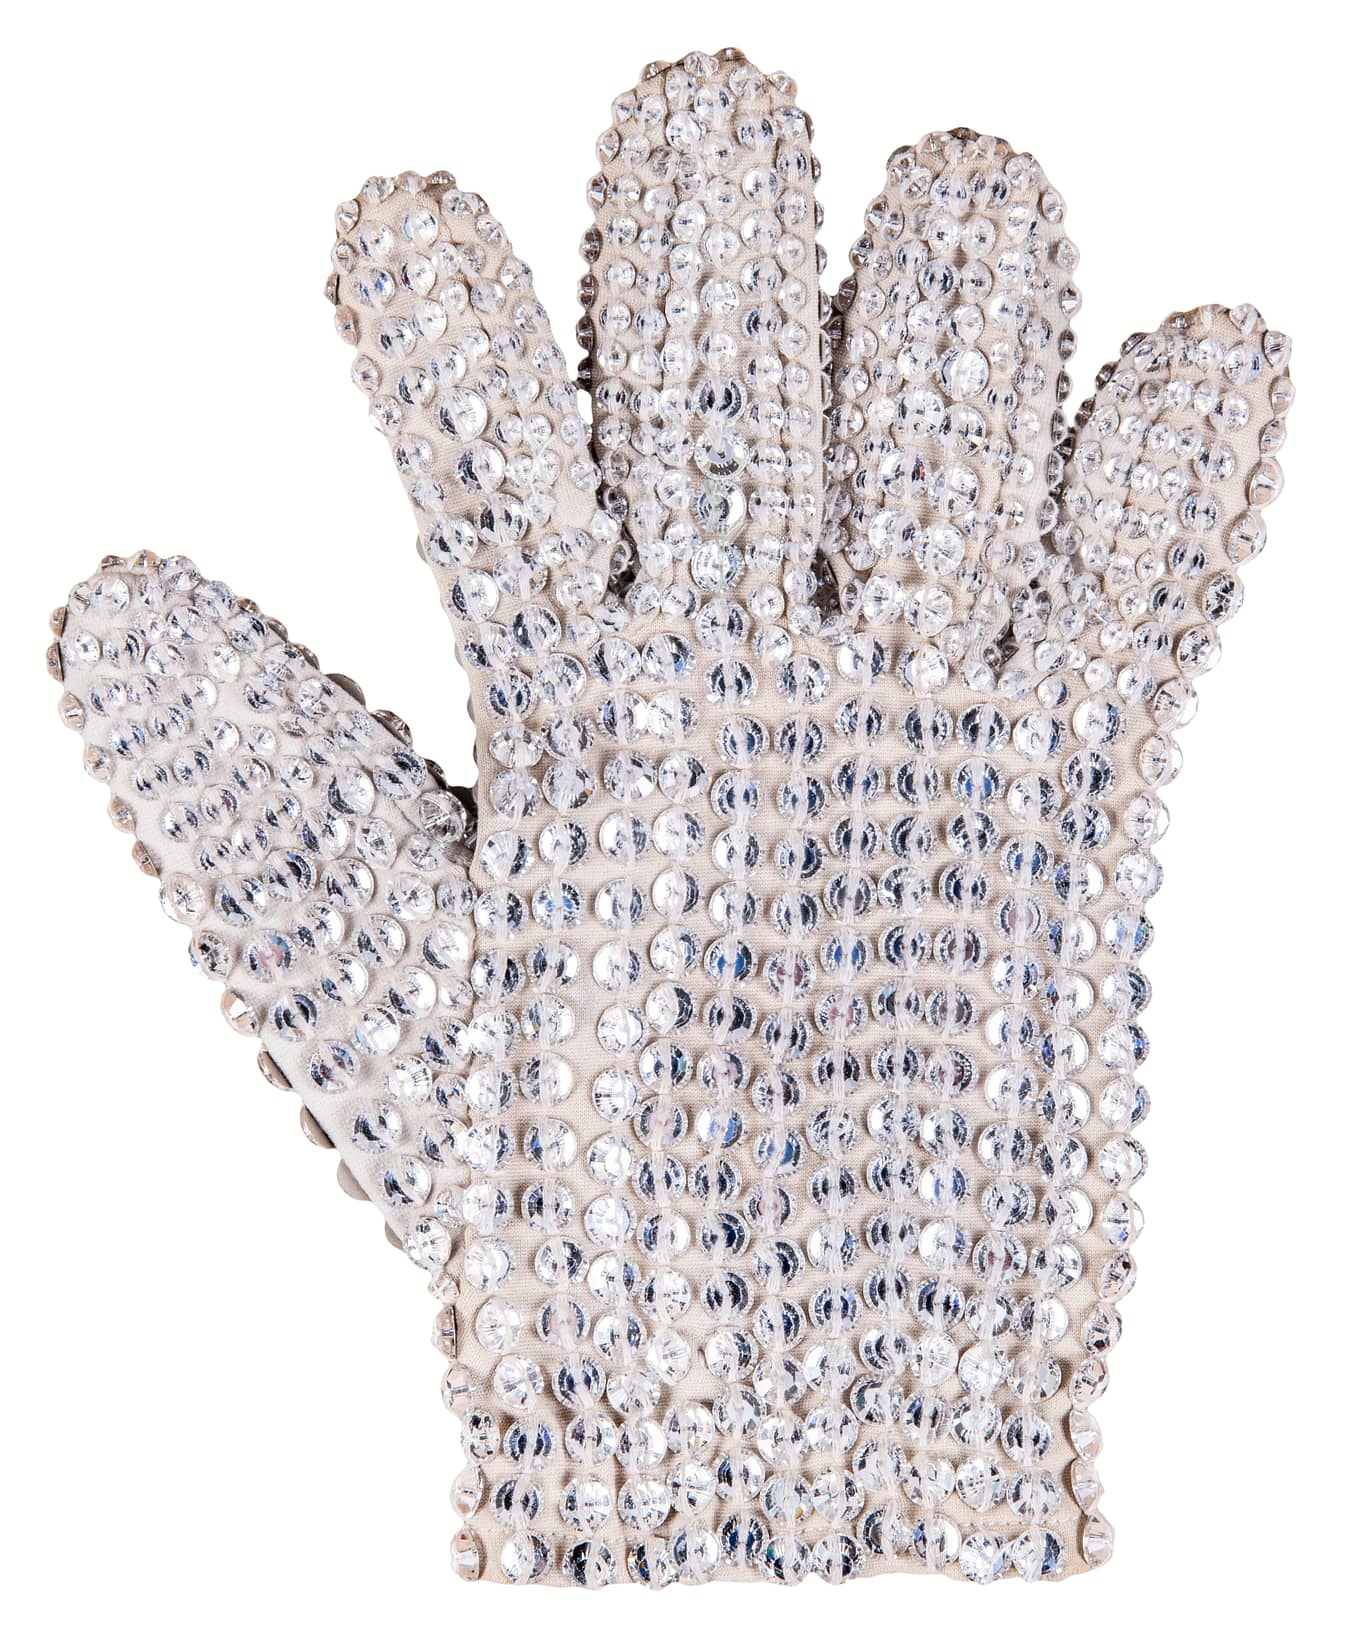 MICHAEL JACKSON GLOVE FROM THE 1984 VICTORY TOUR